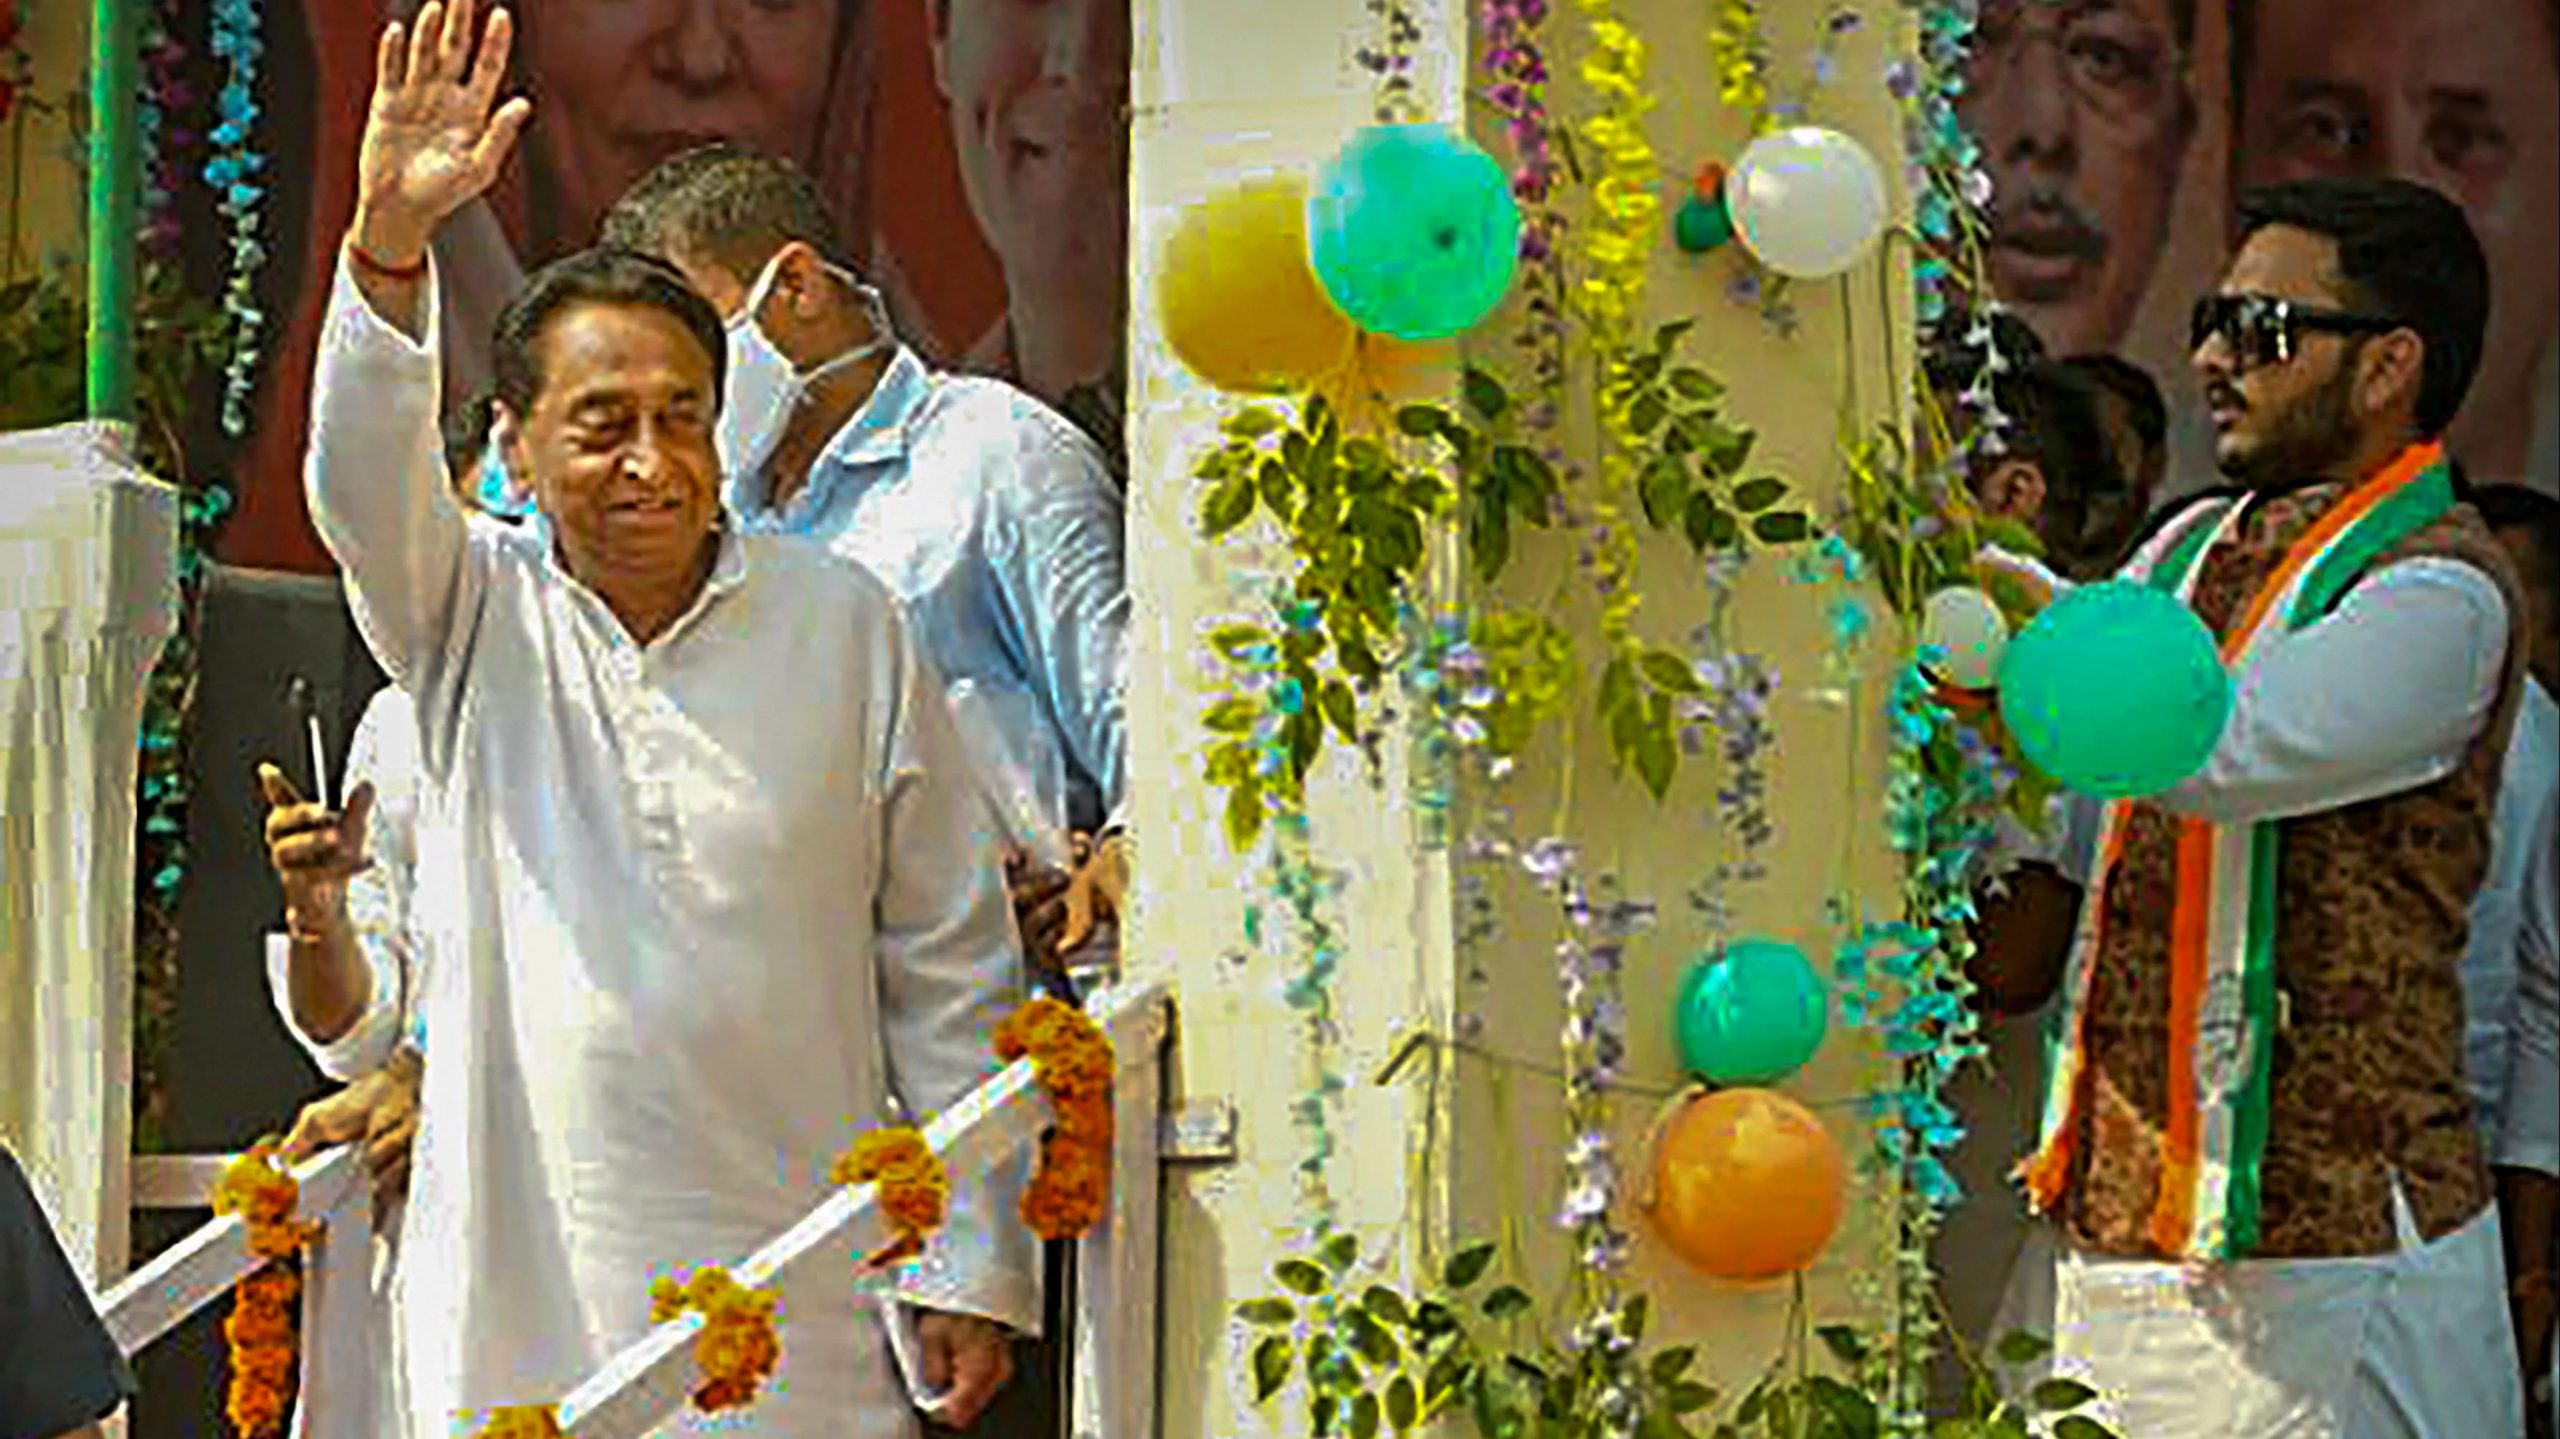 Supreme Court stays Election Commission’s revocation of Kamal Nath’s star campaigner status